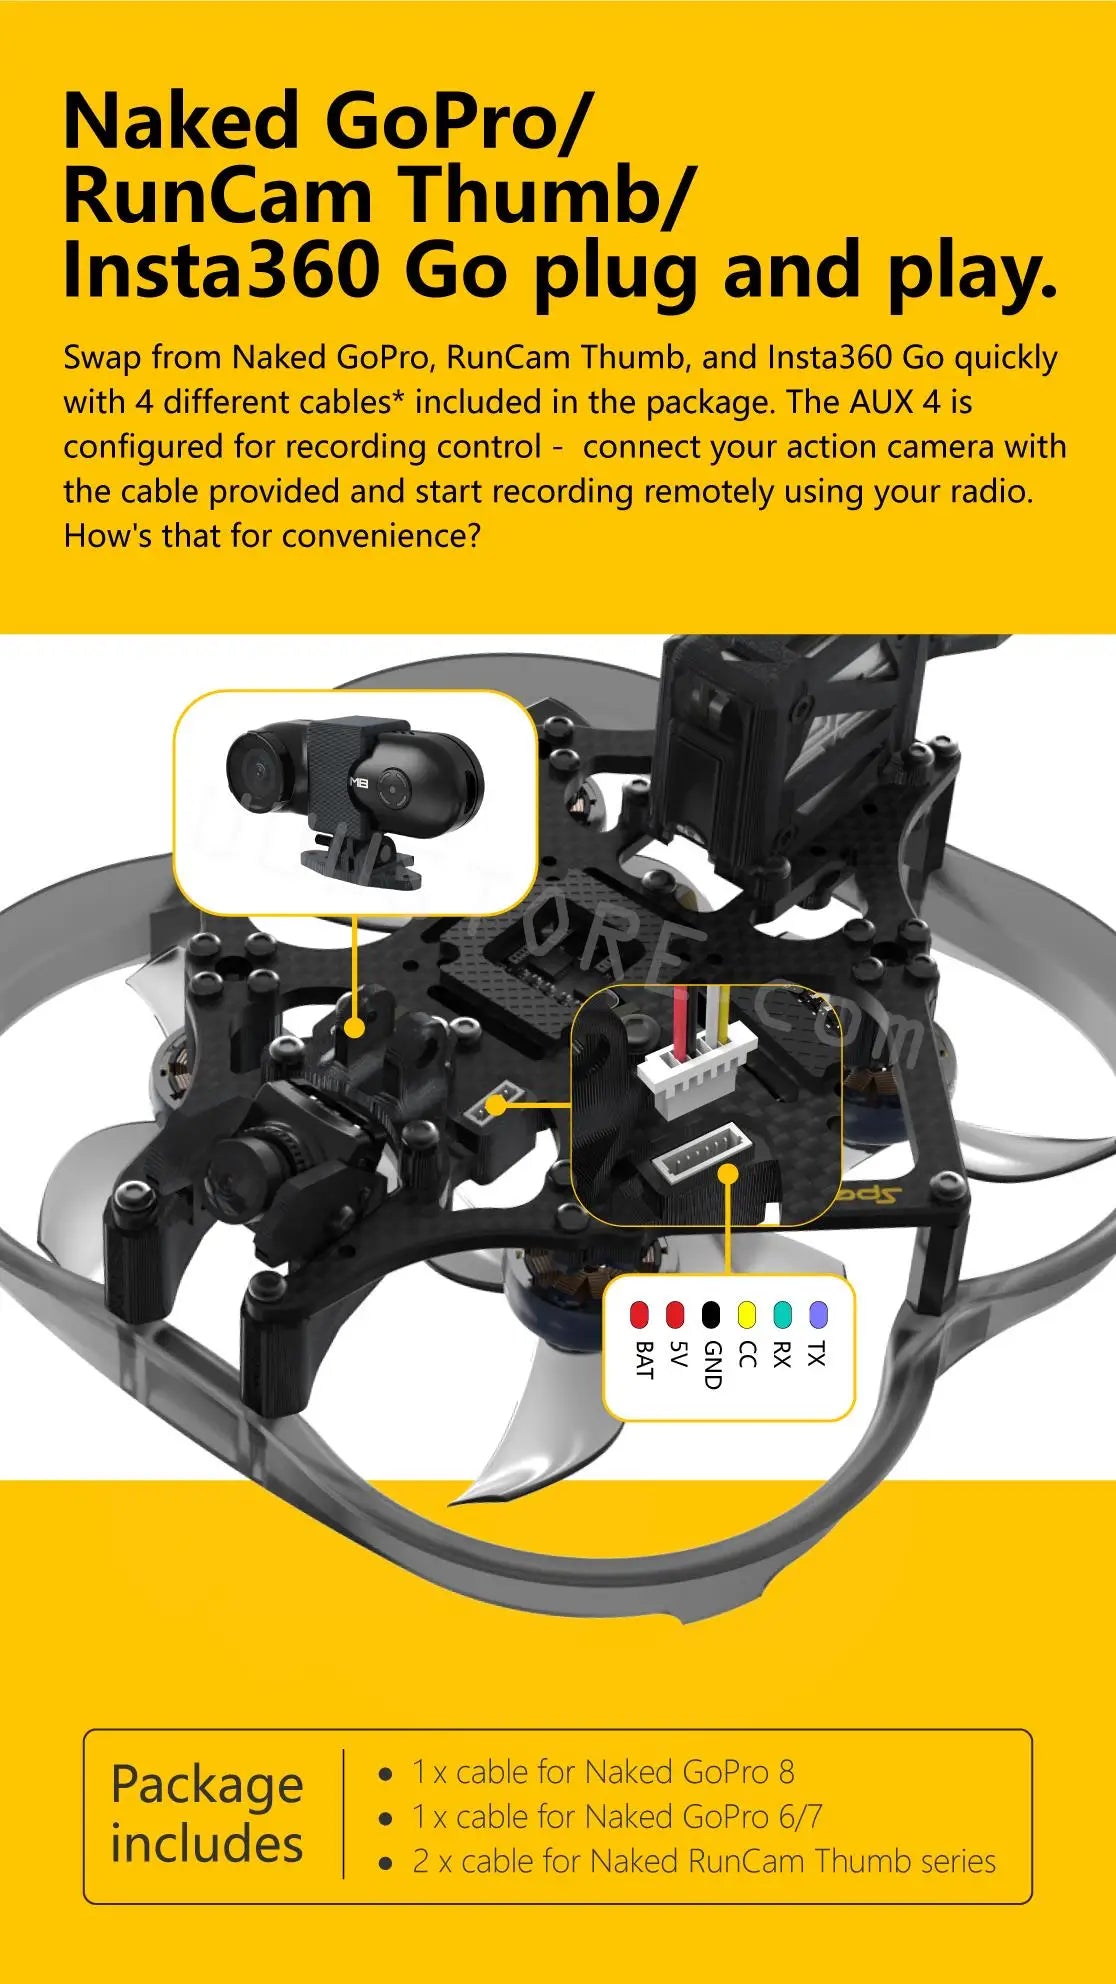 SpeedyBee Flex25, the AUX 4 is configured for recording control connect your action camera with the cable provided and